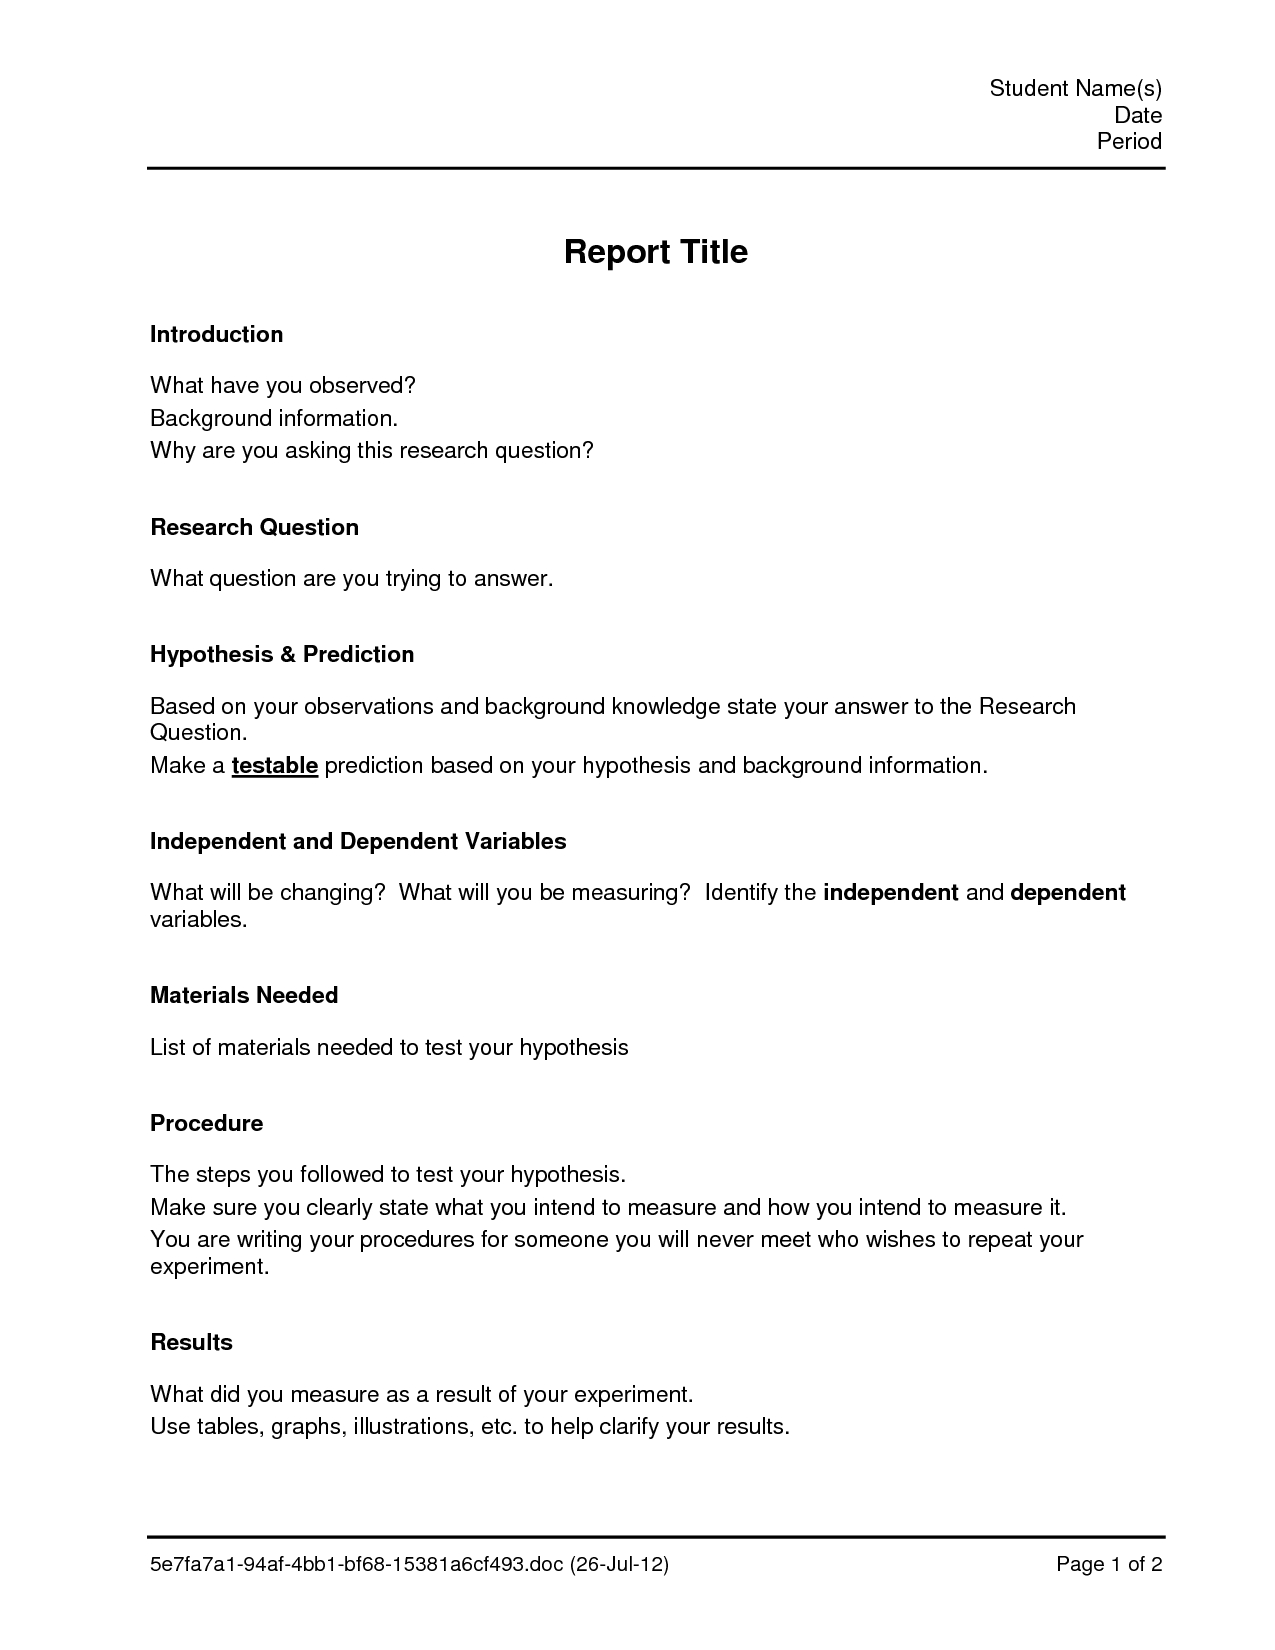 Lab Report Template | E Commercewordpress With Lab Report Template Word